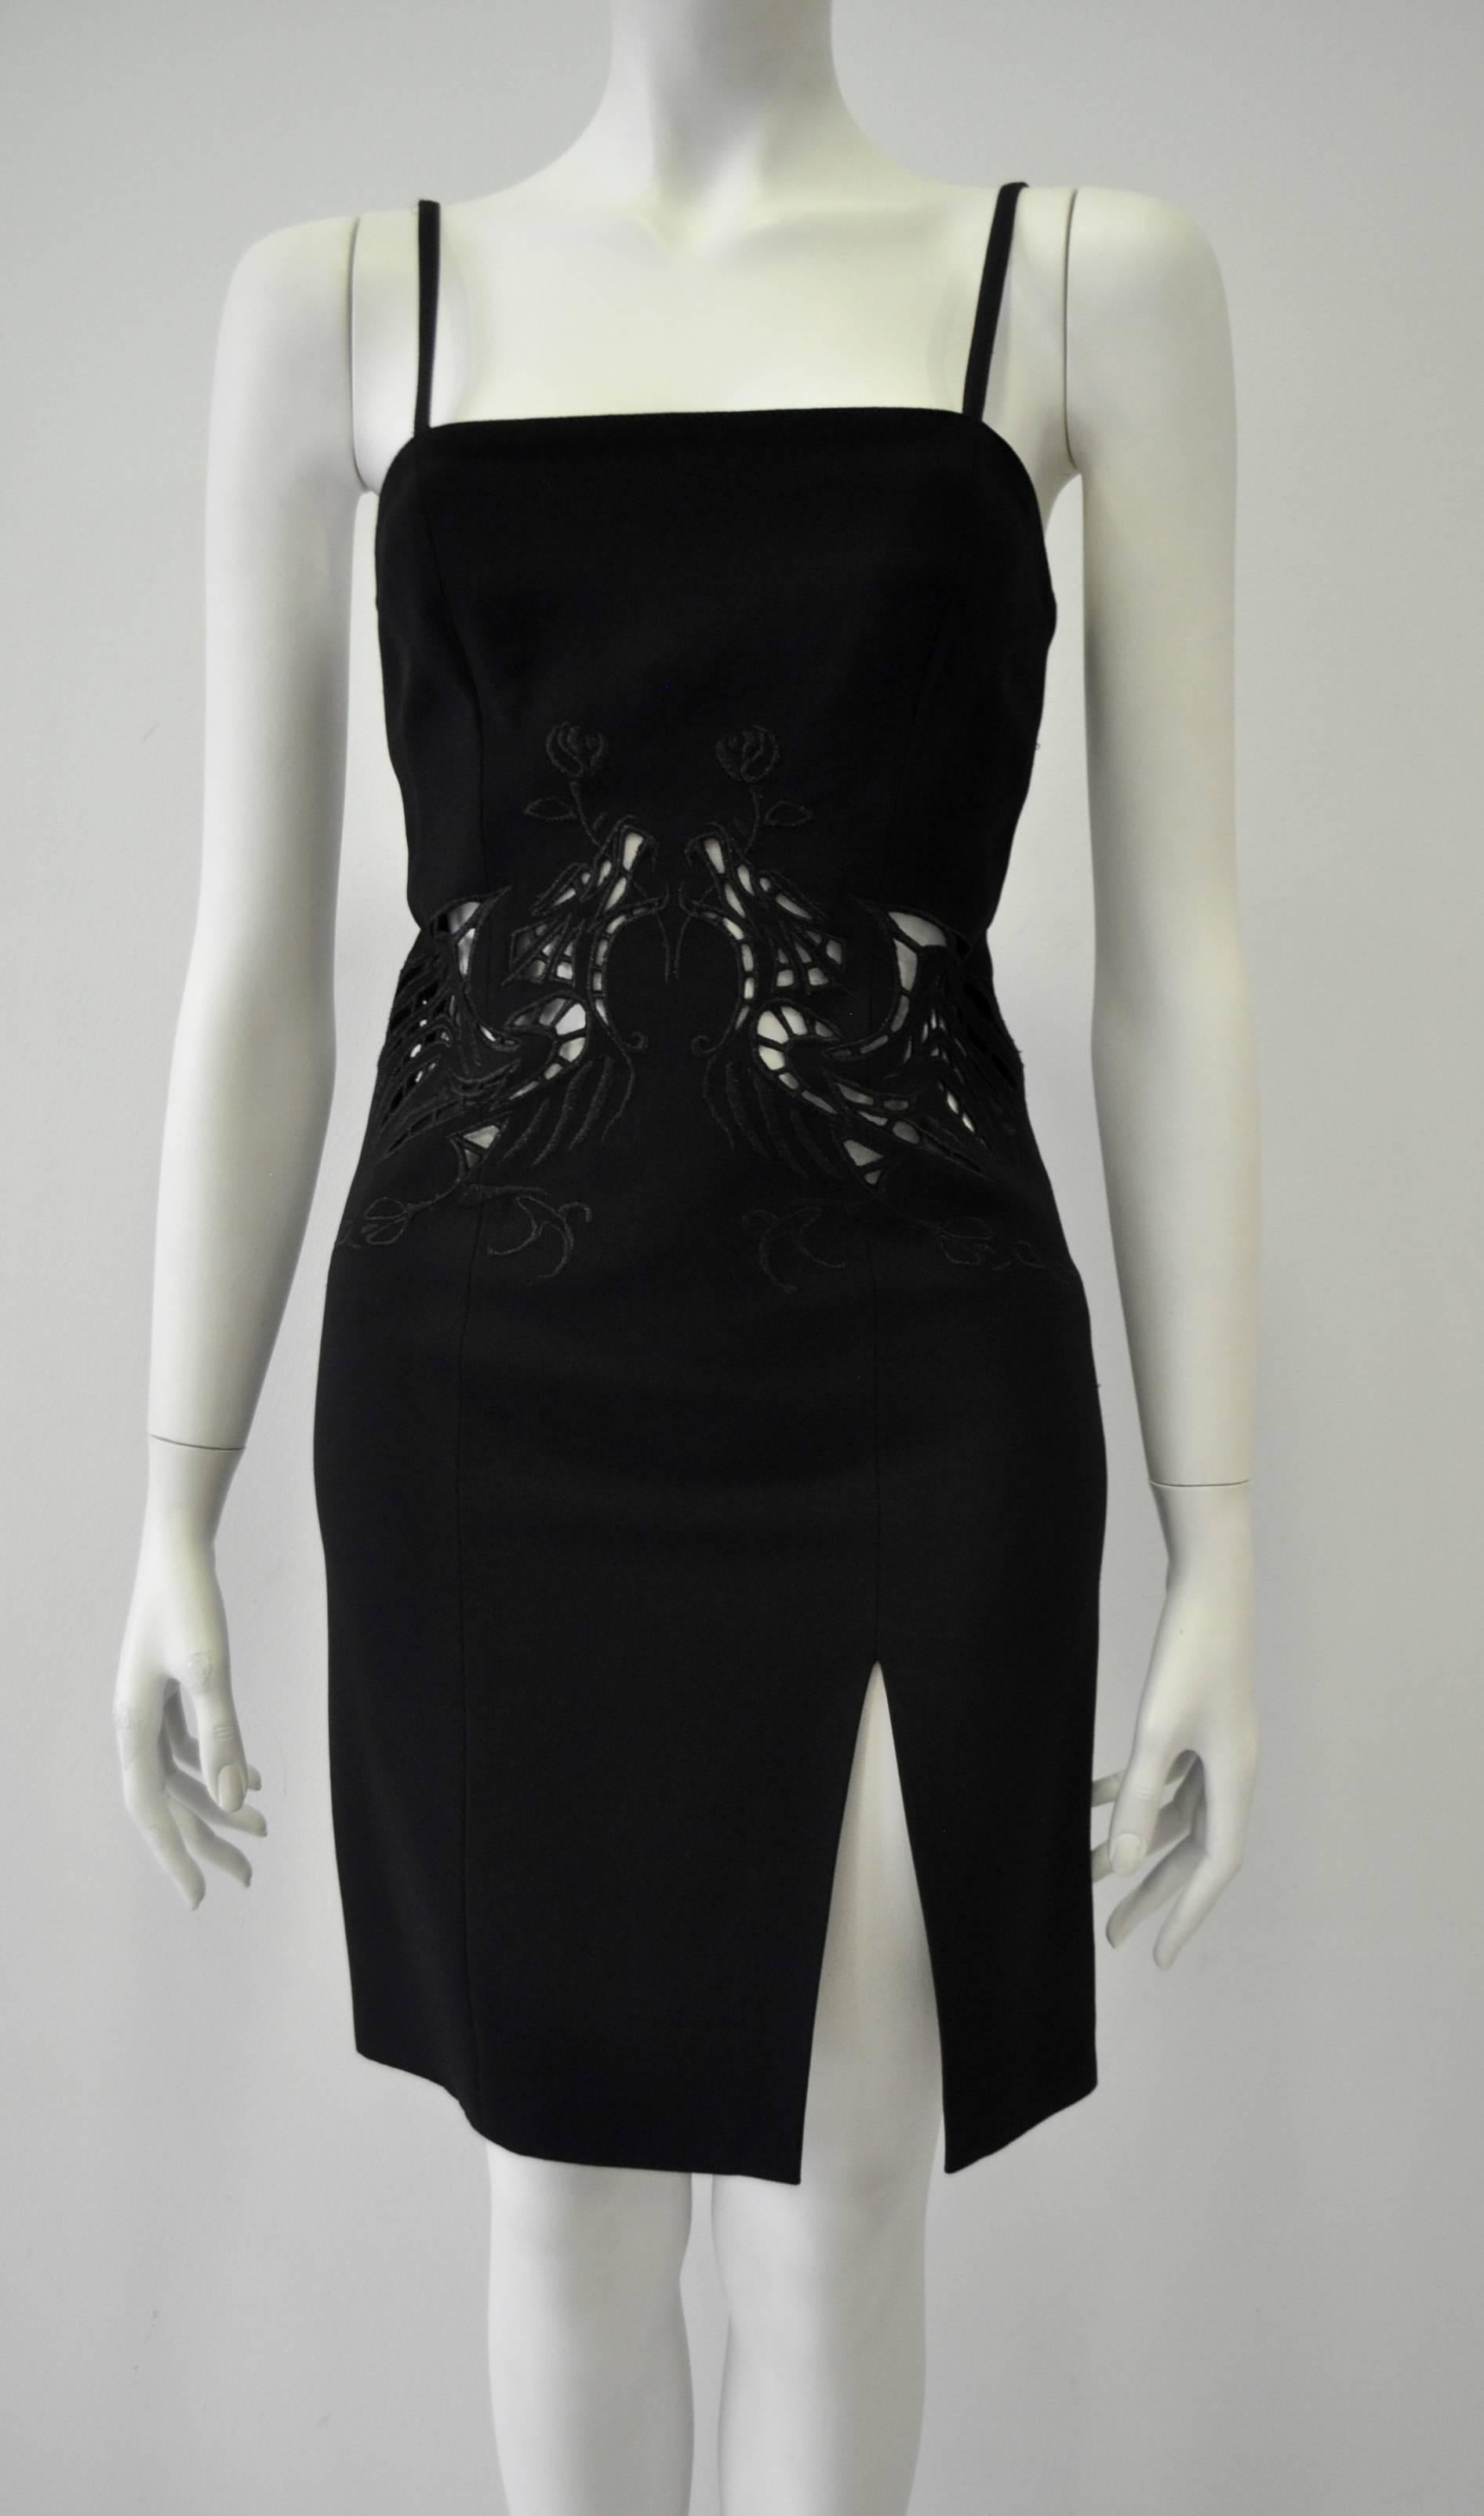 Chic Angelo Mozzillo Cut-Out Floral Embroidered Midriff Black Cocktail Dress In New Condition For Sale In Athens, Agia Paraskevi